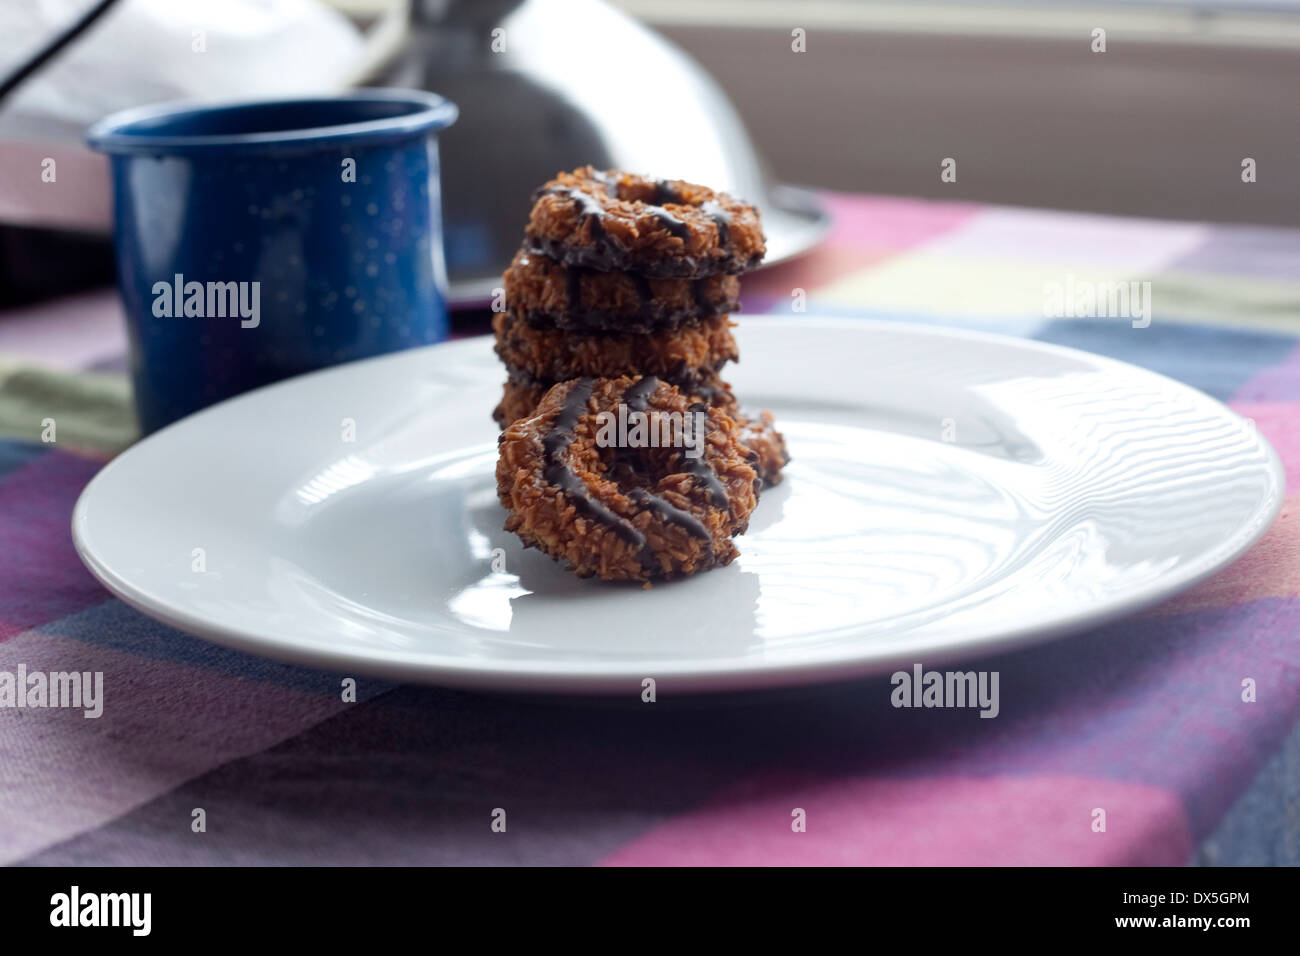 A plate of Girl Scout Cookies. Samoas/ Caramel deLites with a glass of milk Stock Photo